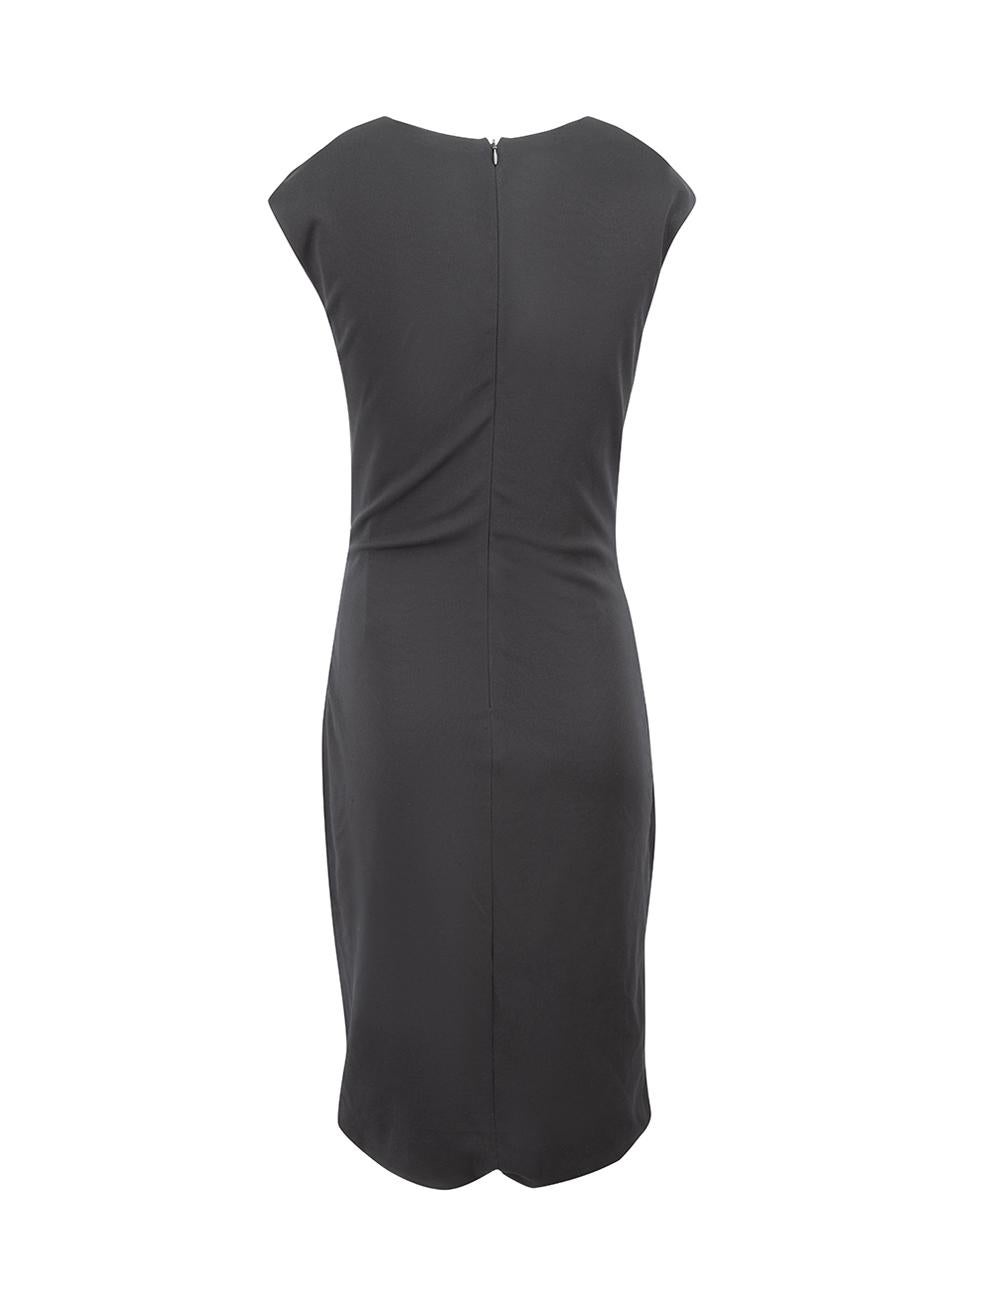 Black Sleeveless V-Neck Dress Size XS In Good Condition In London, GB